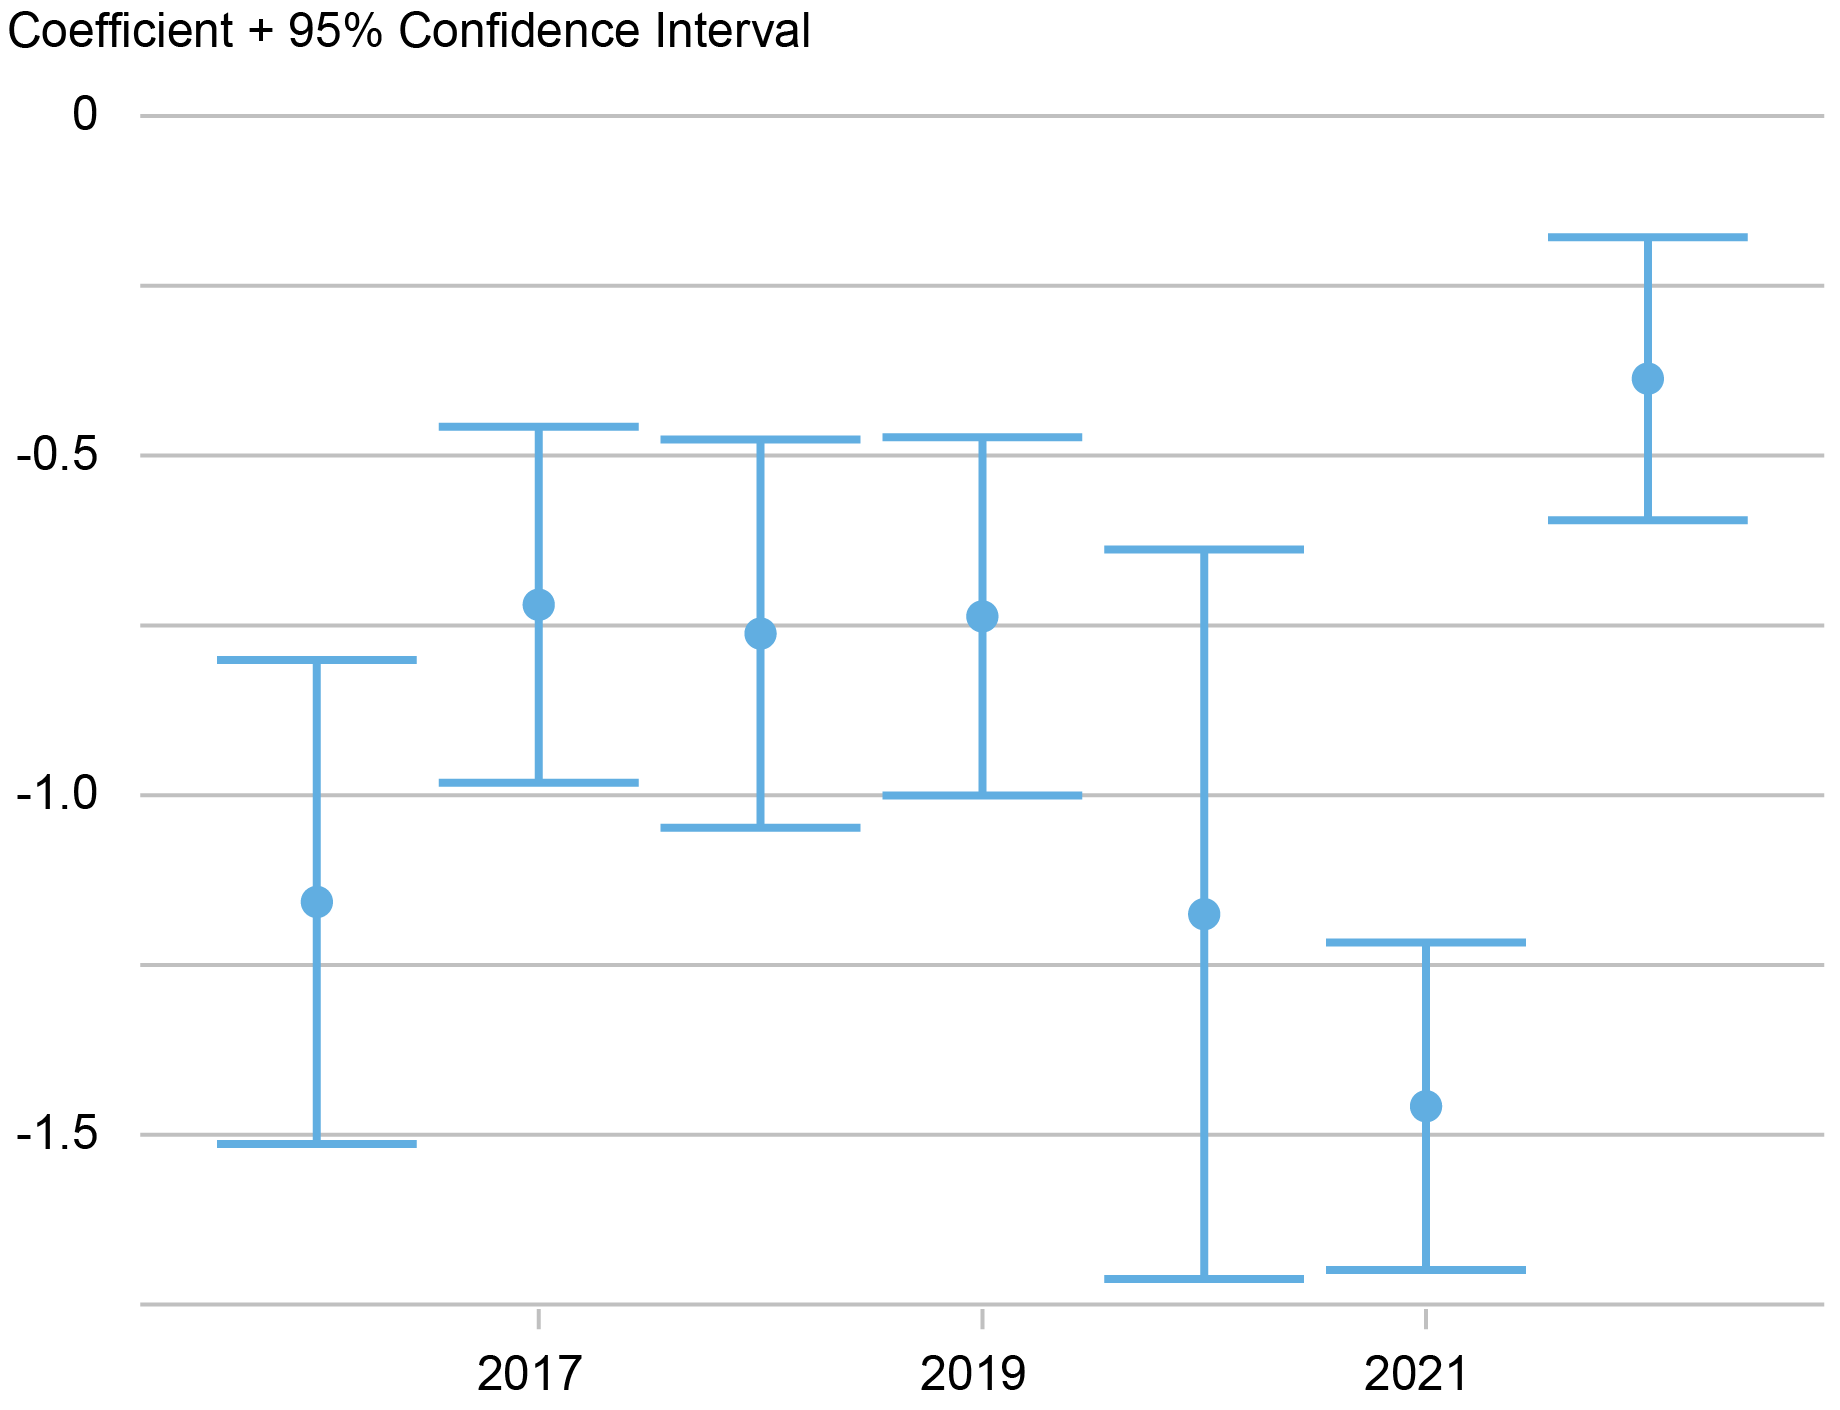 Chart tracking estimates of the coefficient plus 95% confidence interval between -1.75 and 0 by year from 2016 to 2022